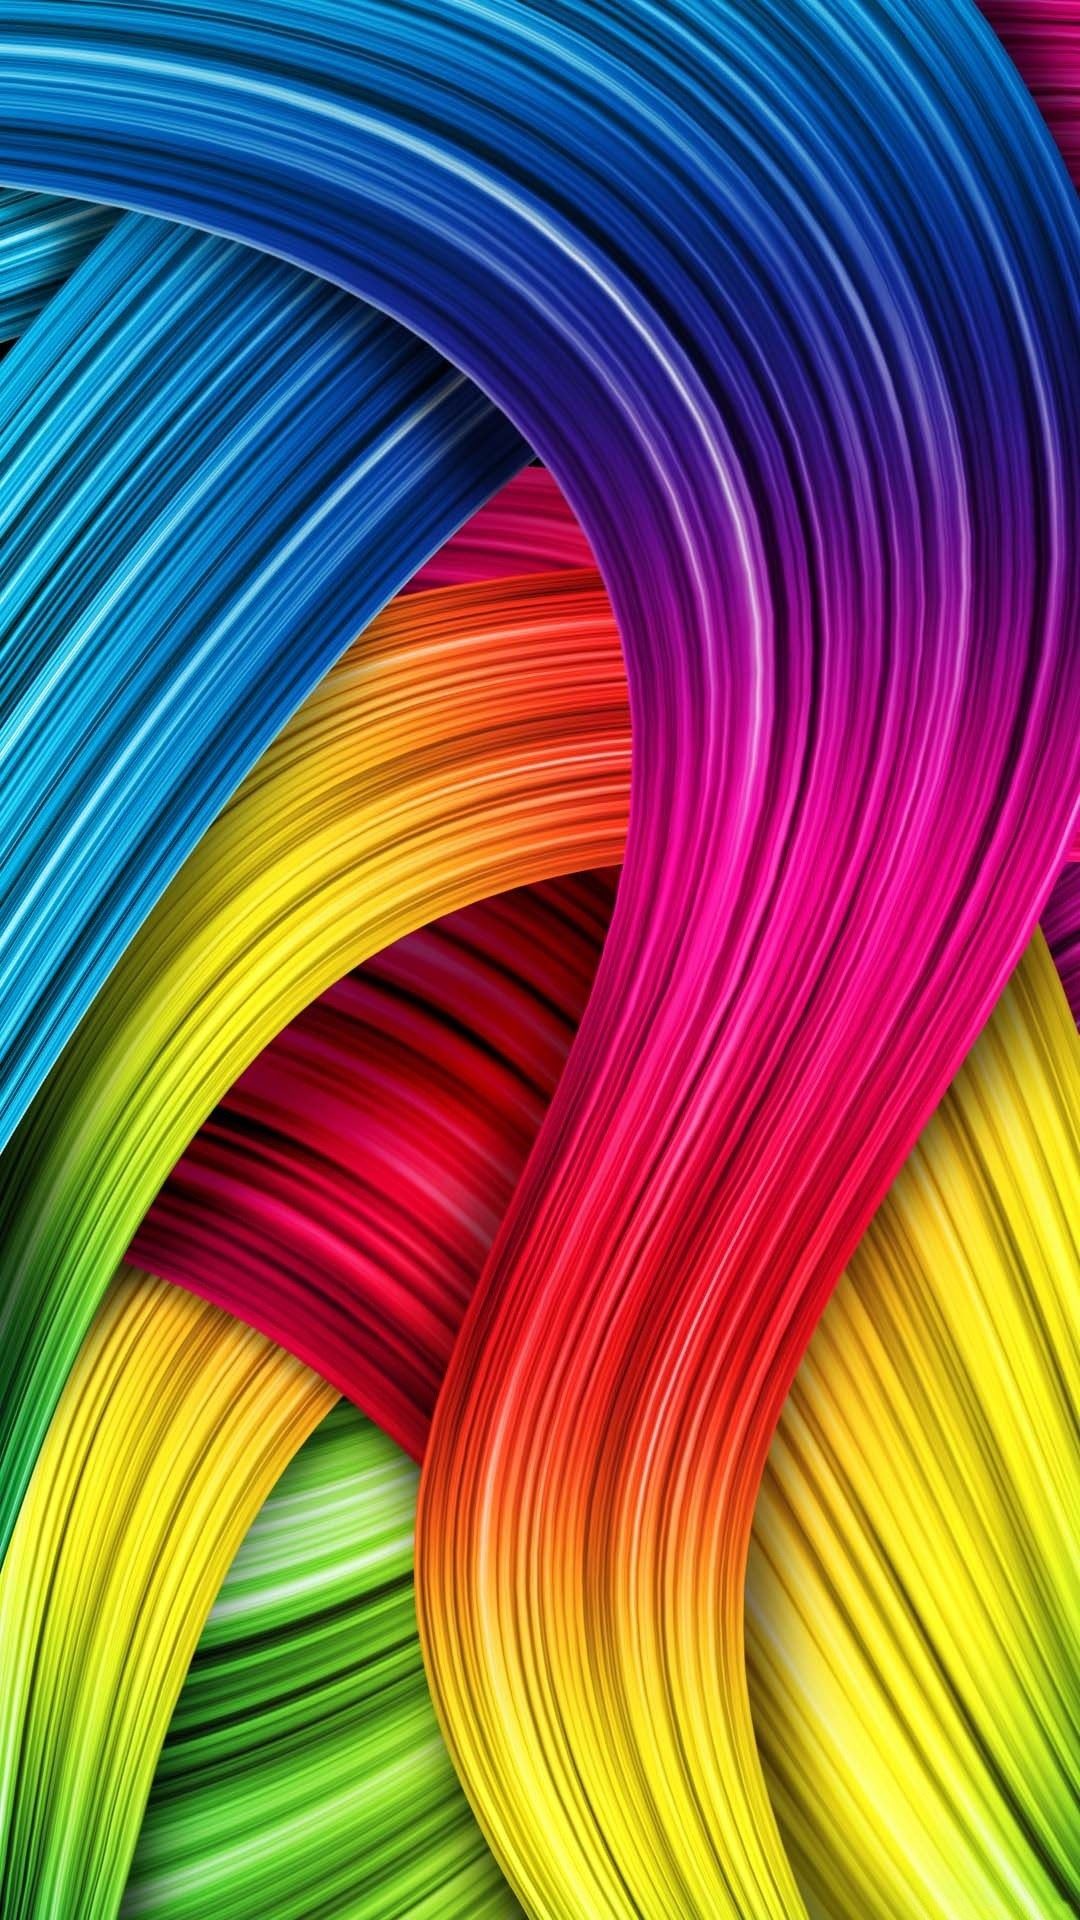 1080x1920 samsung | Free Phone Wallpapers For Mobile Cell Phone Backgrounds .